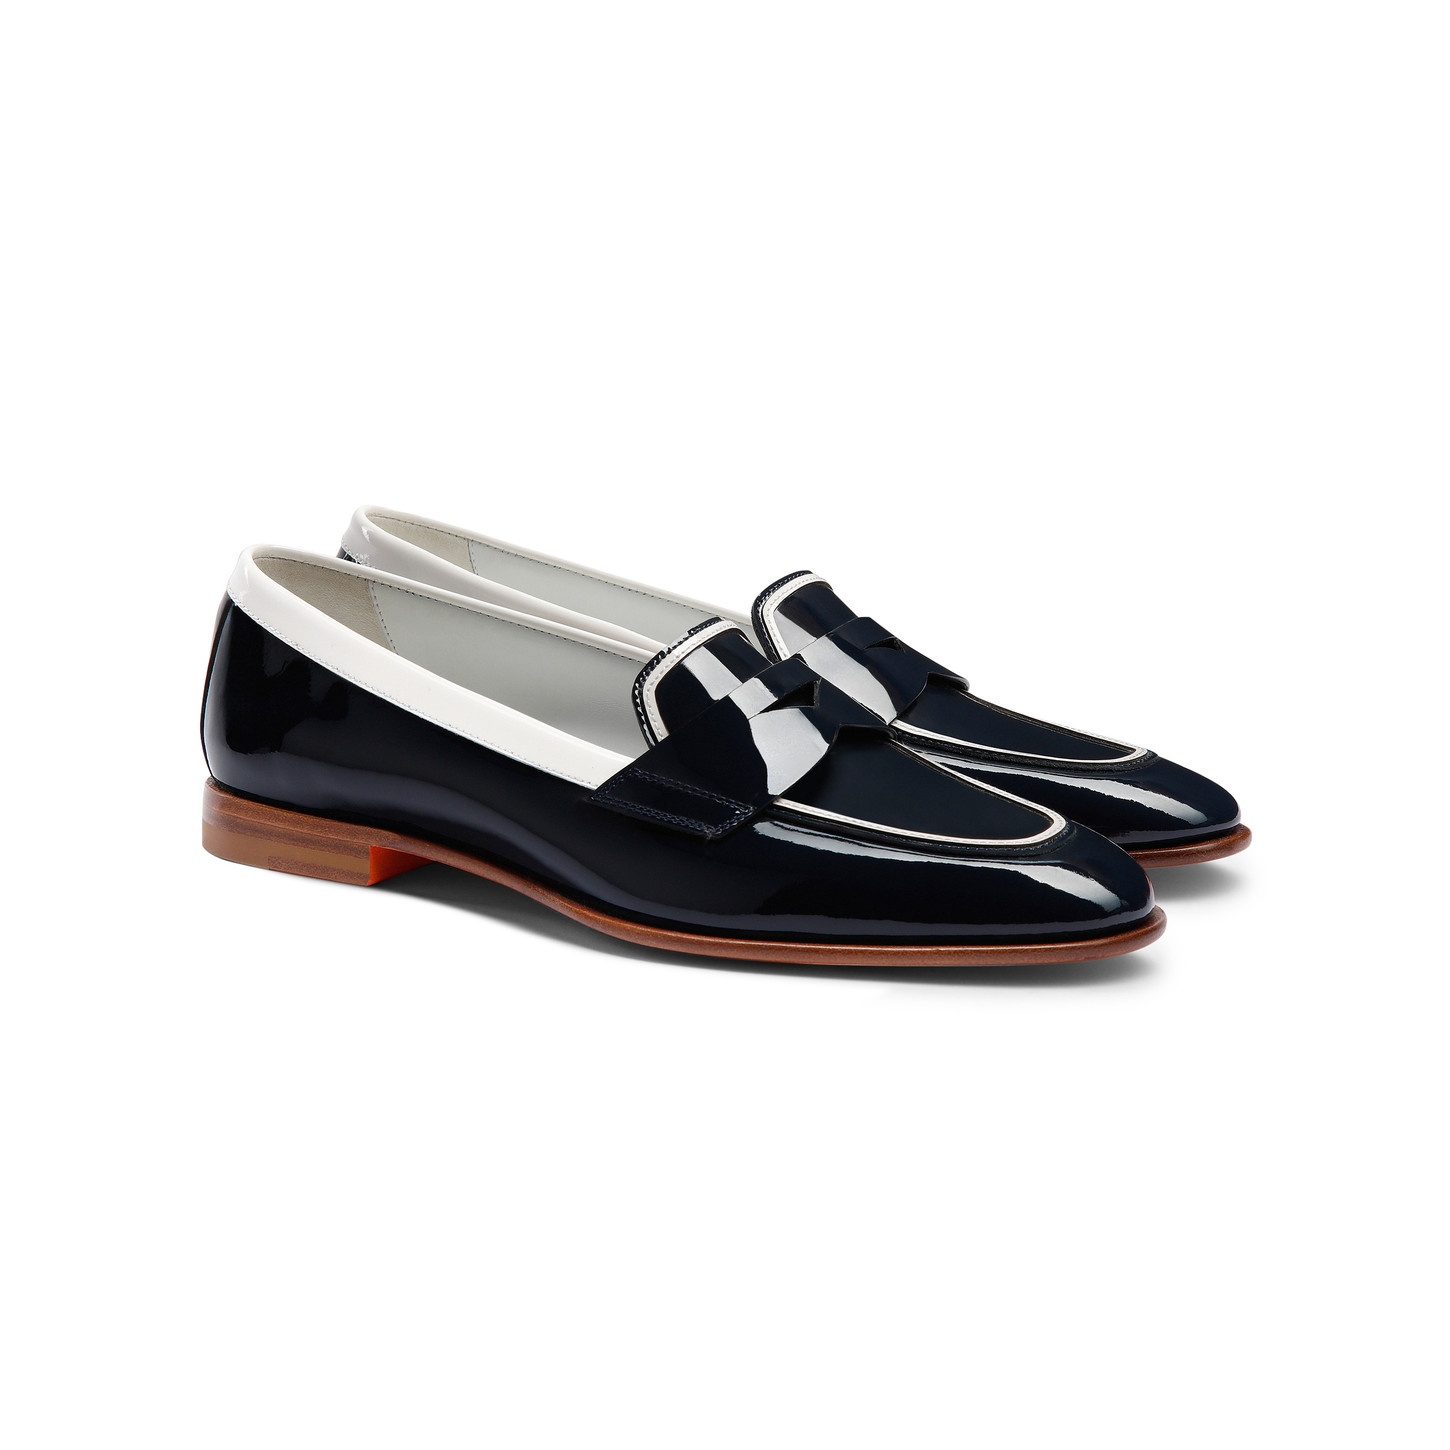 Women's blue and white patent leather penny loafer - 3